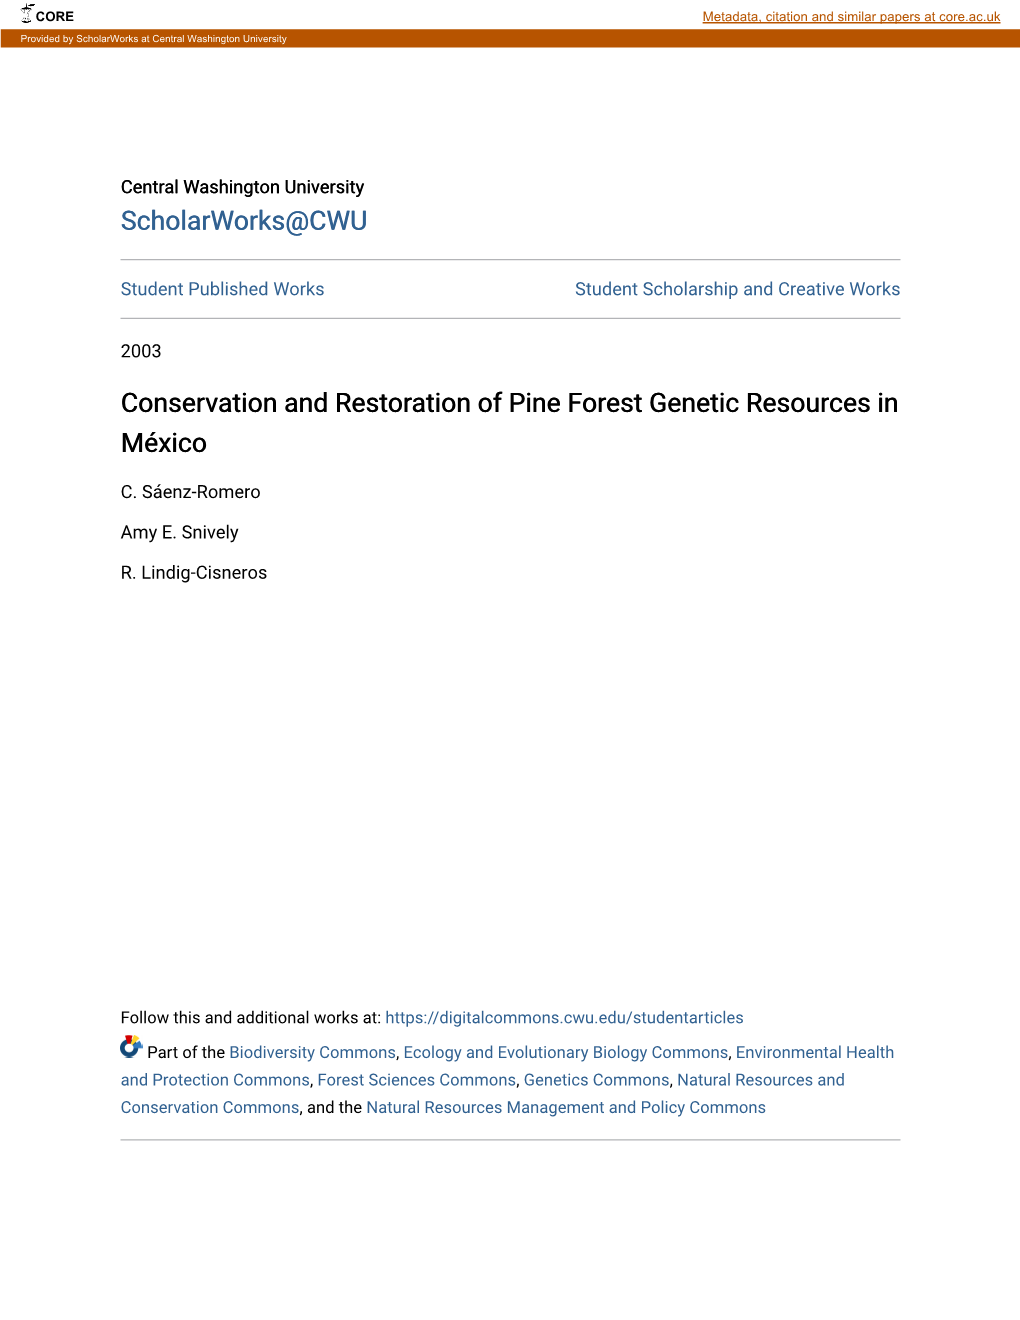 Conservation and Restoration of Pine Forest Genetic Resources in México